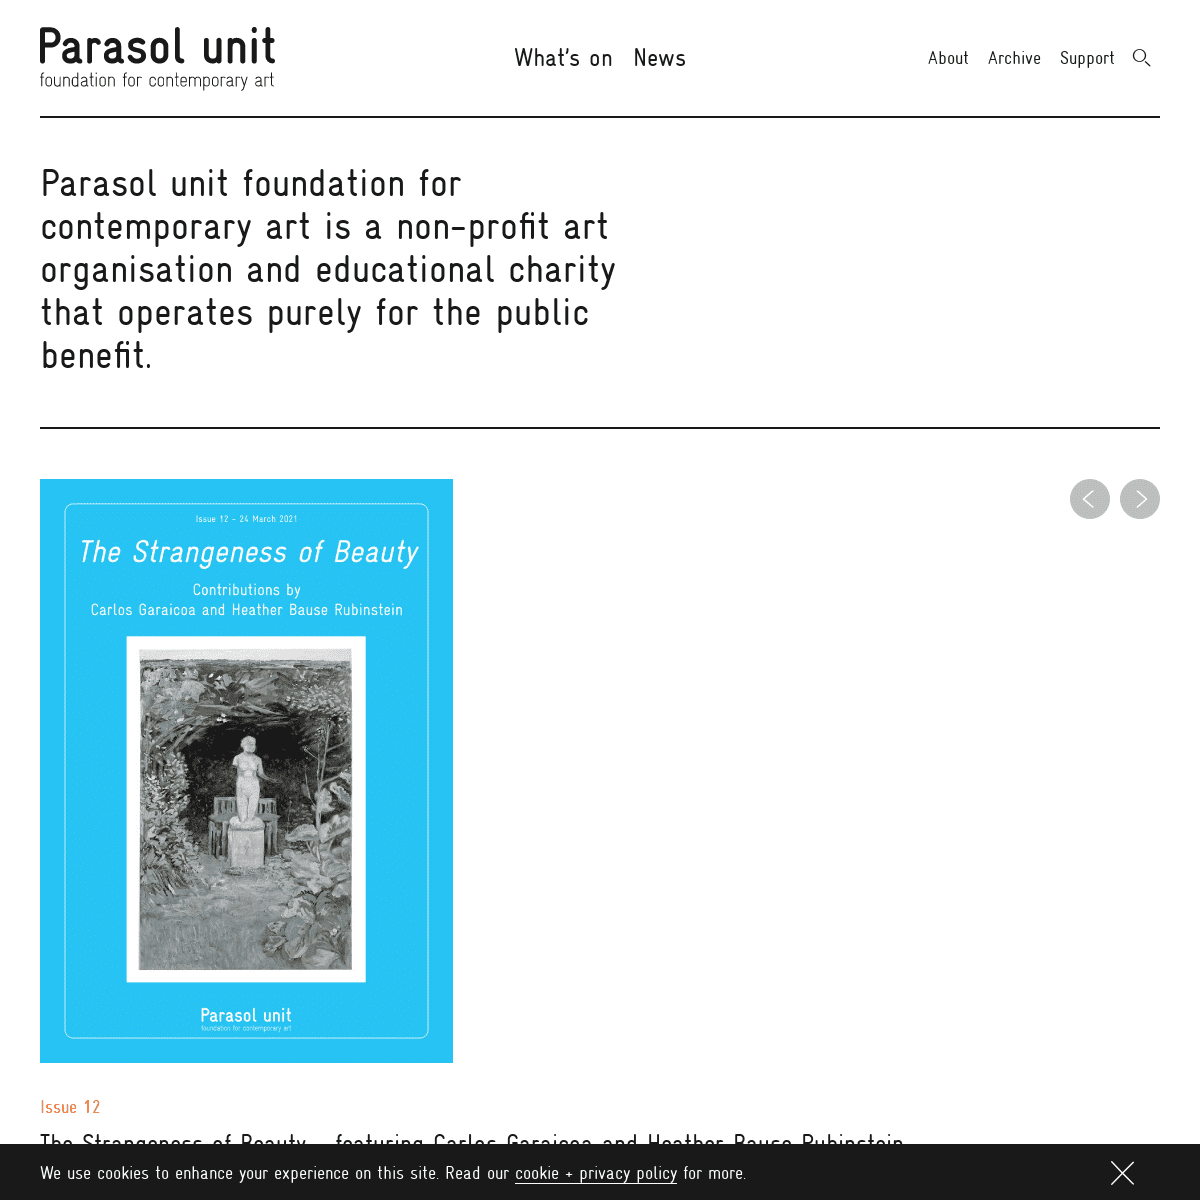 A complete backup of https://parasol-unit.org